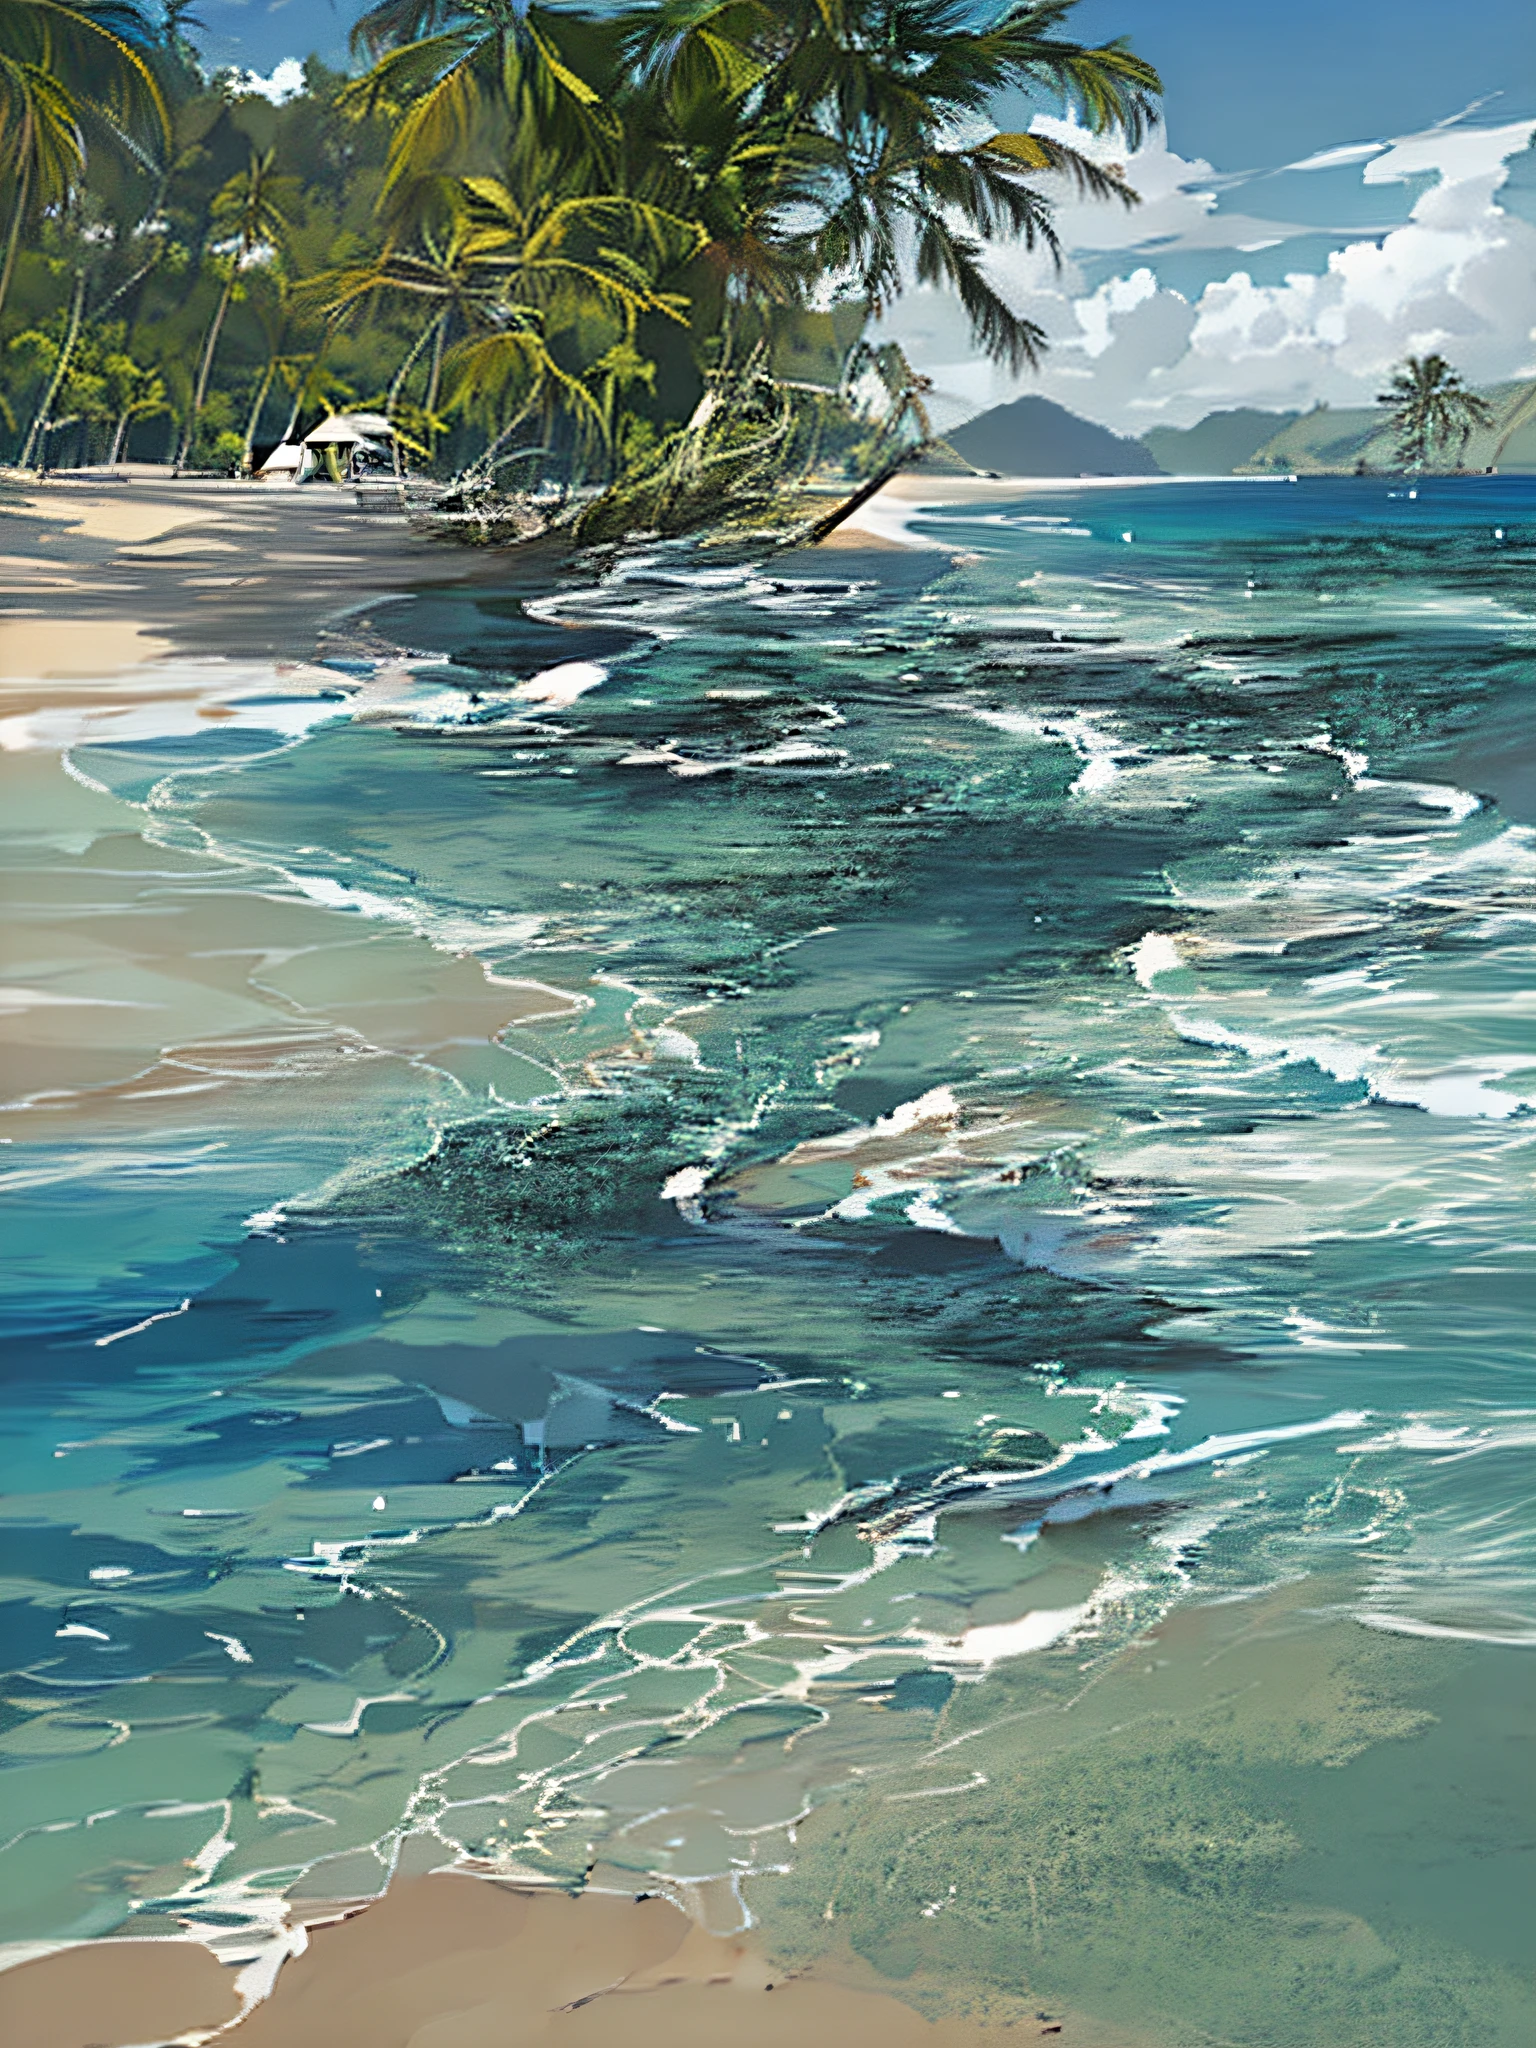 Draw beach with blue sea and palm trees, (beach crawled with baby dragons: 2), highly detailed digital painting, gorgeous digital painting, beautiful digital painting, very detailed digital painting, stunning digital painting, very detailed digital painting, detailed digital painting, Ross Tran. Landscape background, drawn in anime painter studio, high detail digital painting, beautiful artwork illustration, high quality digital painting in stunning digital paint